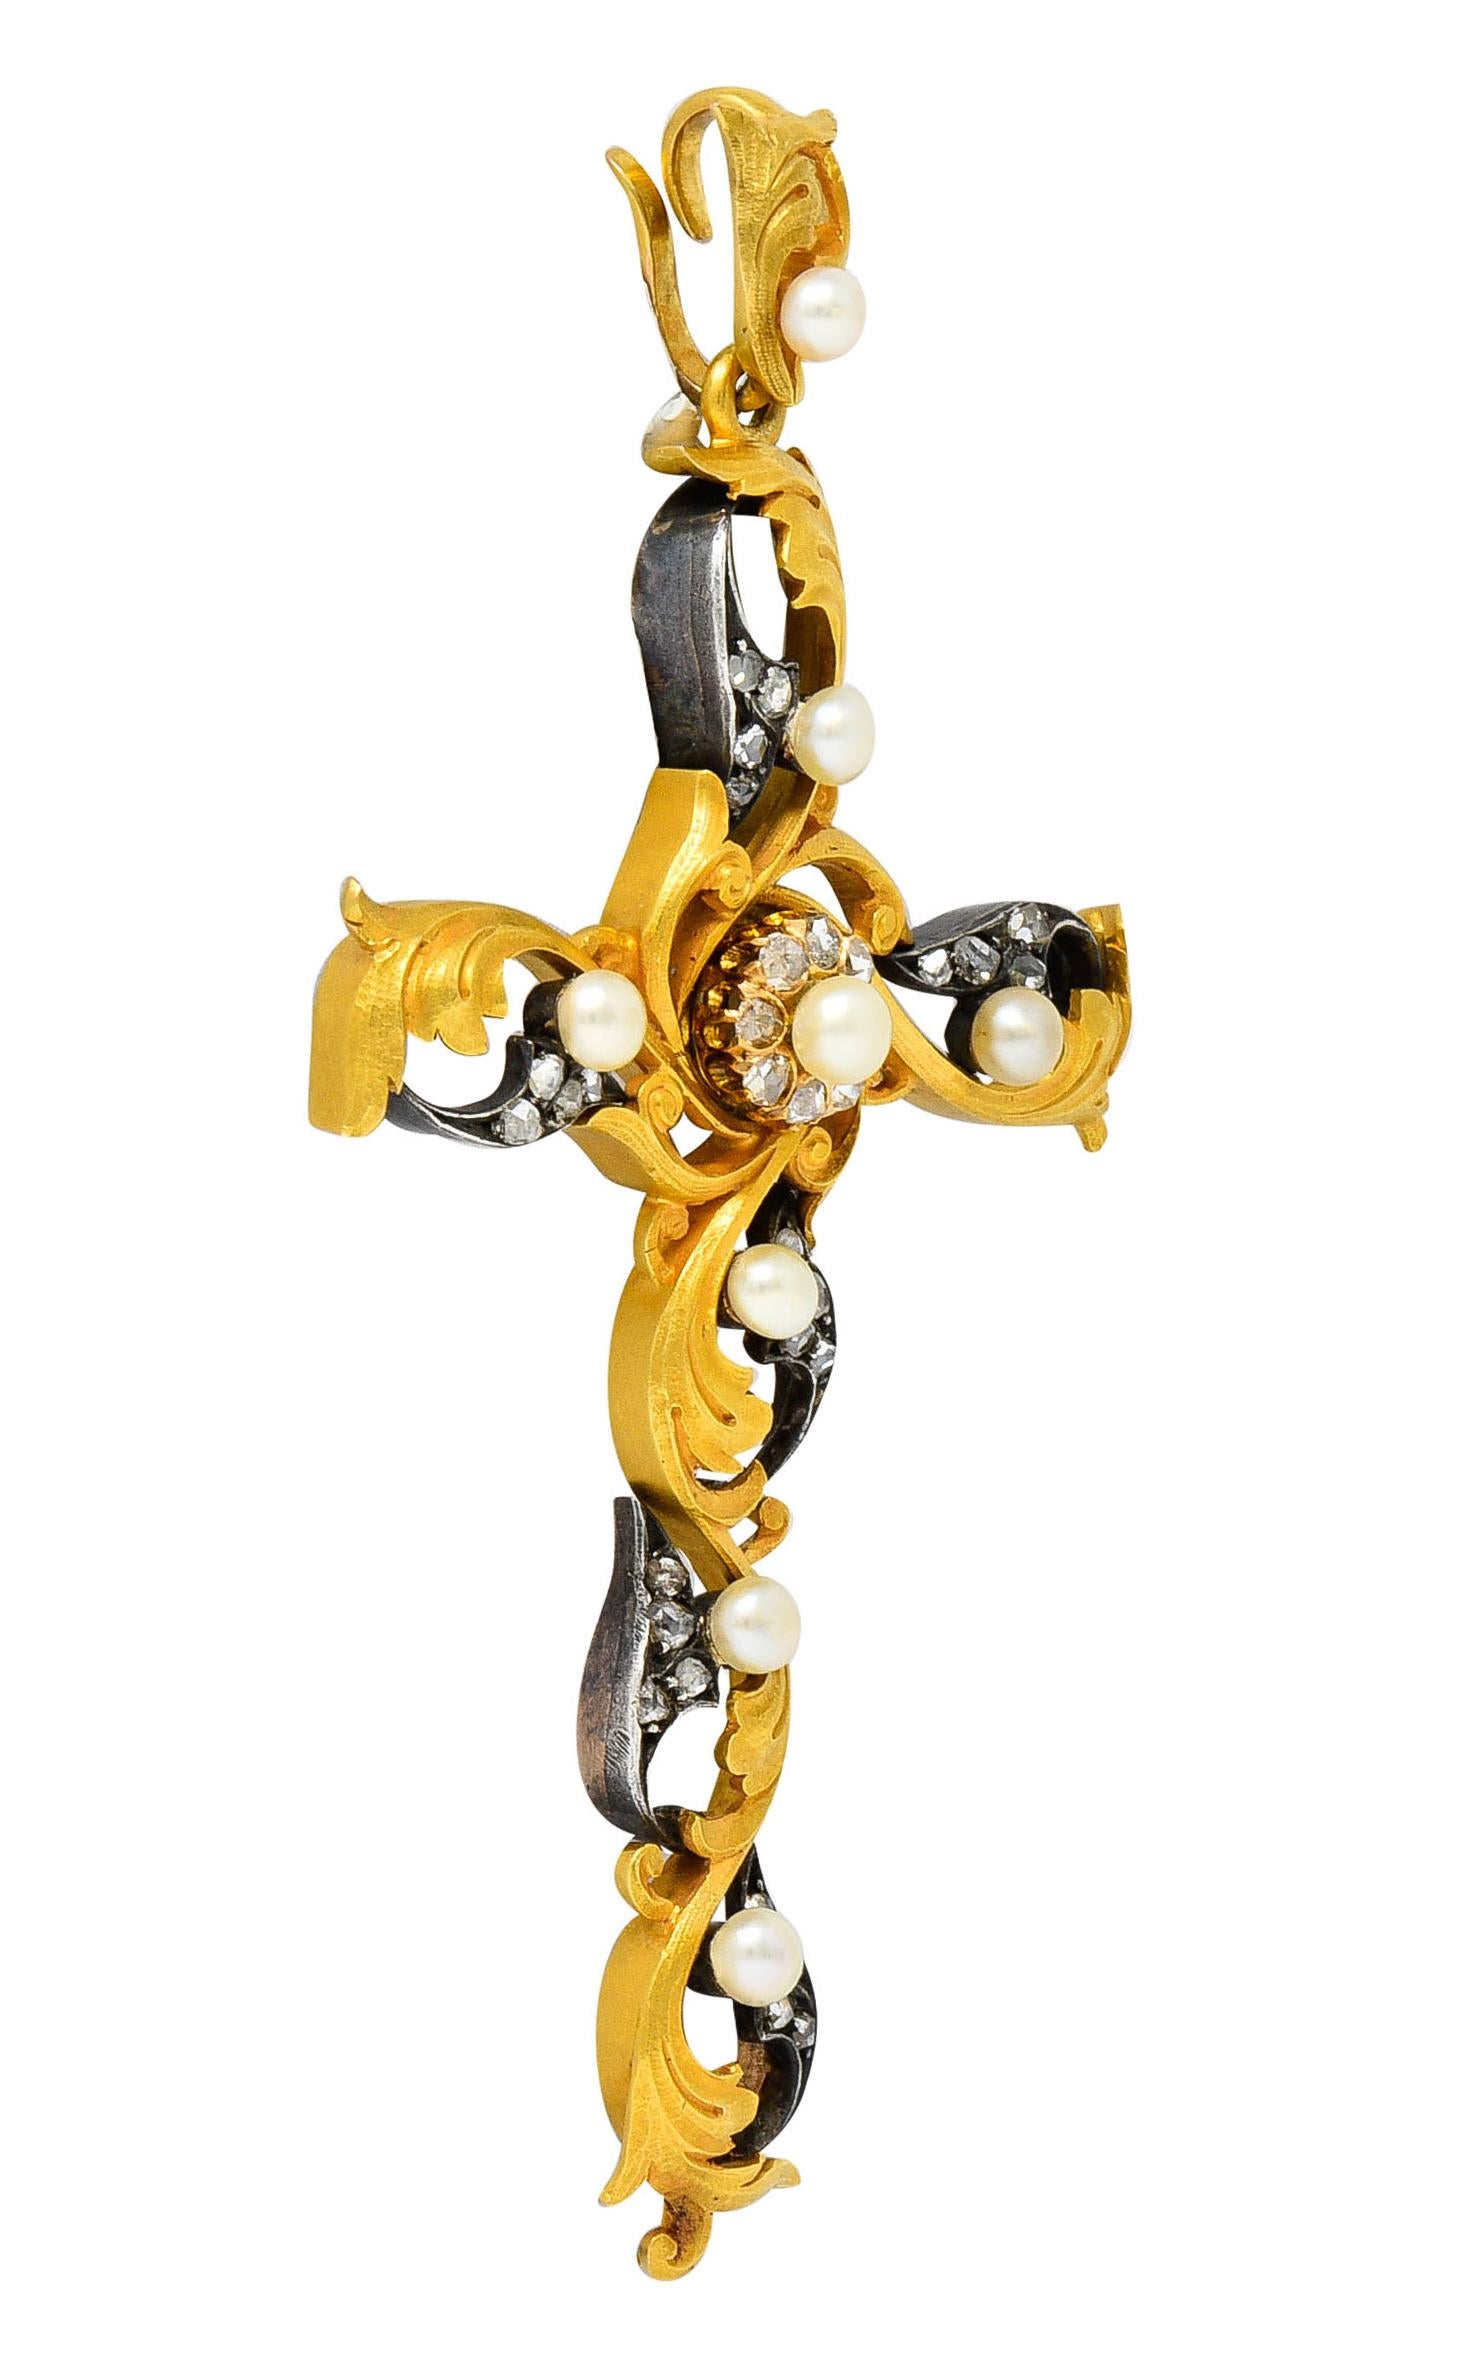 Substantial cross pendant is comprised of oxidized silver and matte 18 karat gold; tested

Each extension is two-toned with scrolling foliate whiplash

Featuring eight 4.0 mm round button pearls with well-matched cream color and very good